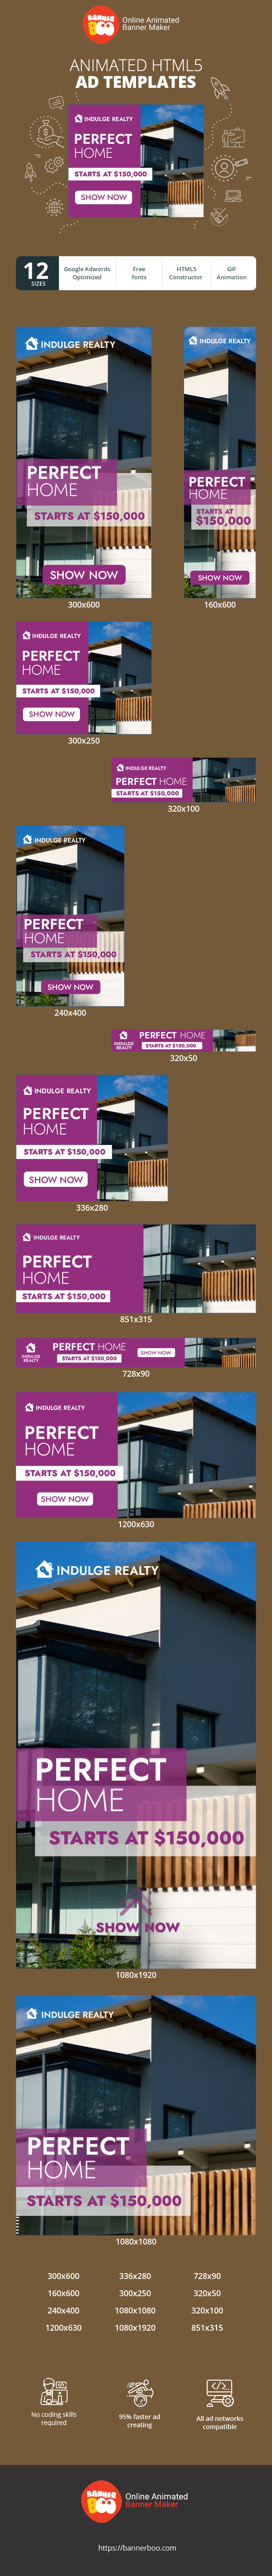 Banner ad template — Perfect Home — Starts At $150,000